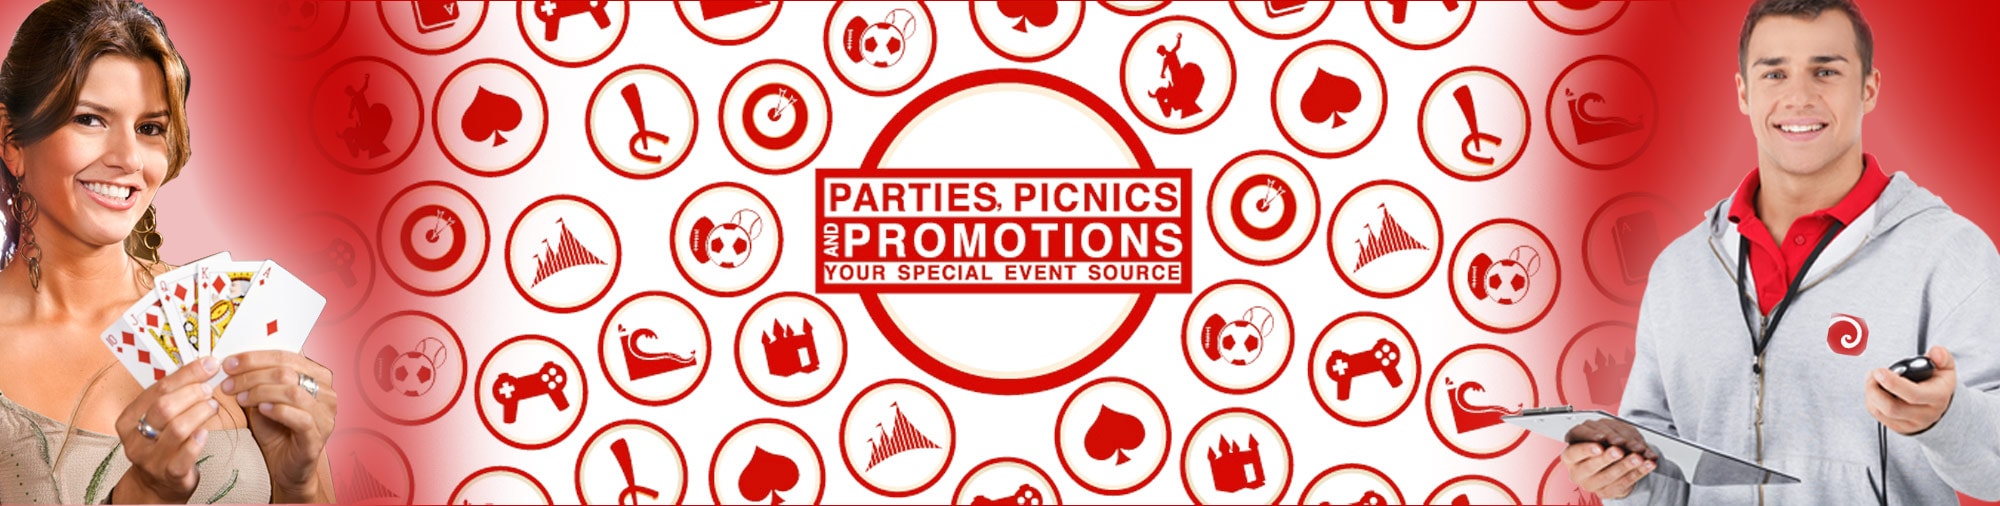 Parties Picnics and Promotions